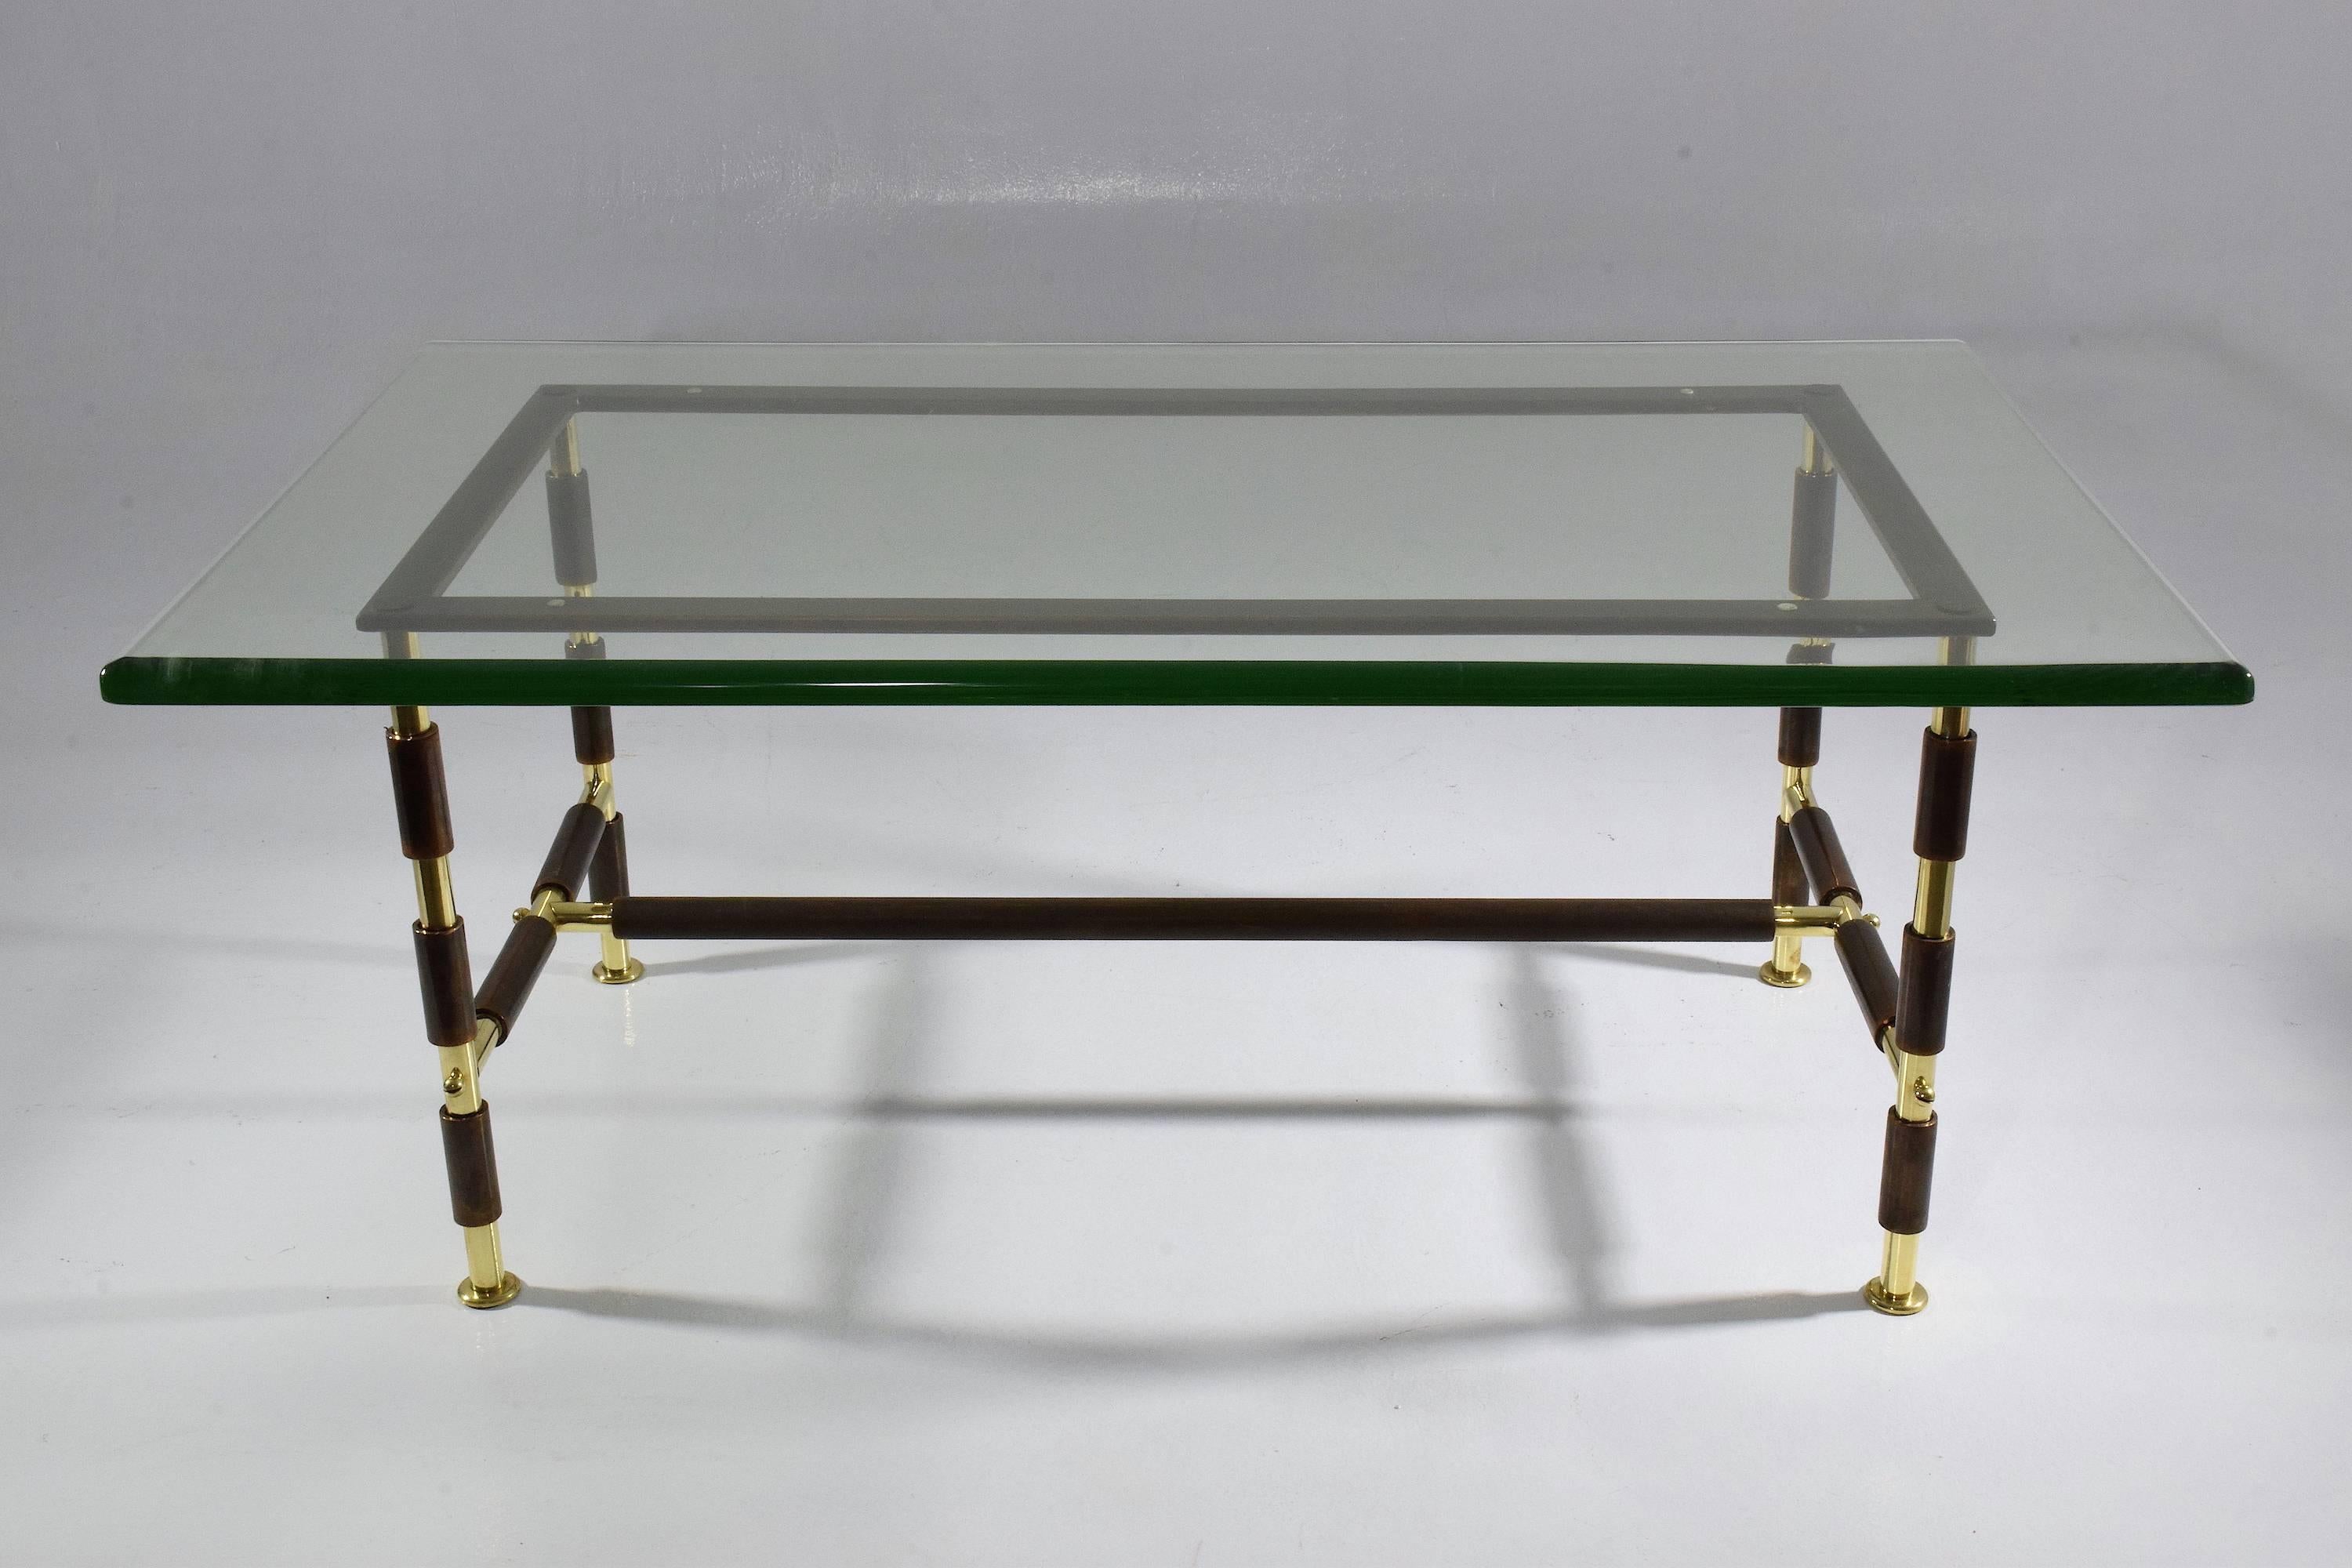 20th-century vintage Italian collectible coffee or cocktail center table no. 1736 designed by Max Ingrand for Fontana Arte composed of polished brass and aged steel structure and available with its beautiful original thick and rounded clear glass